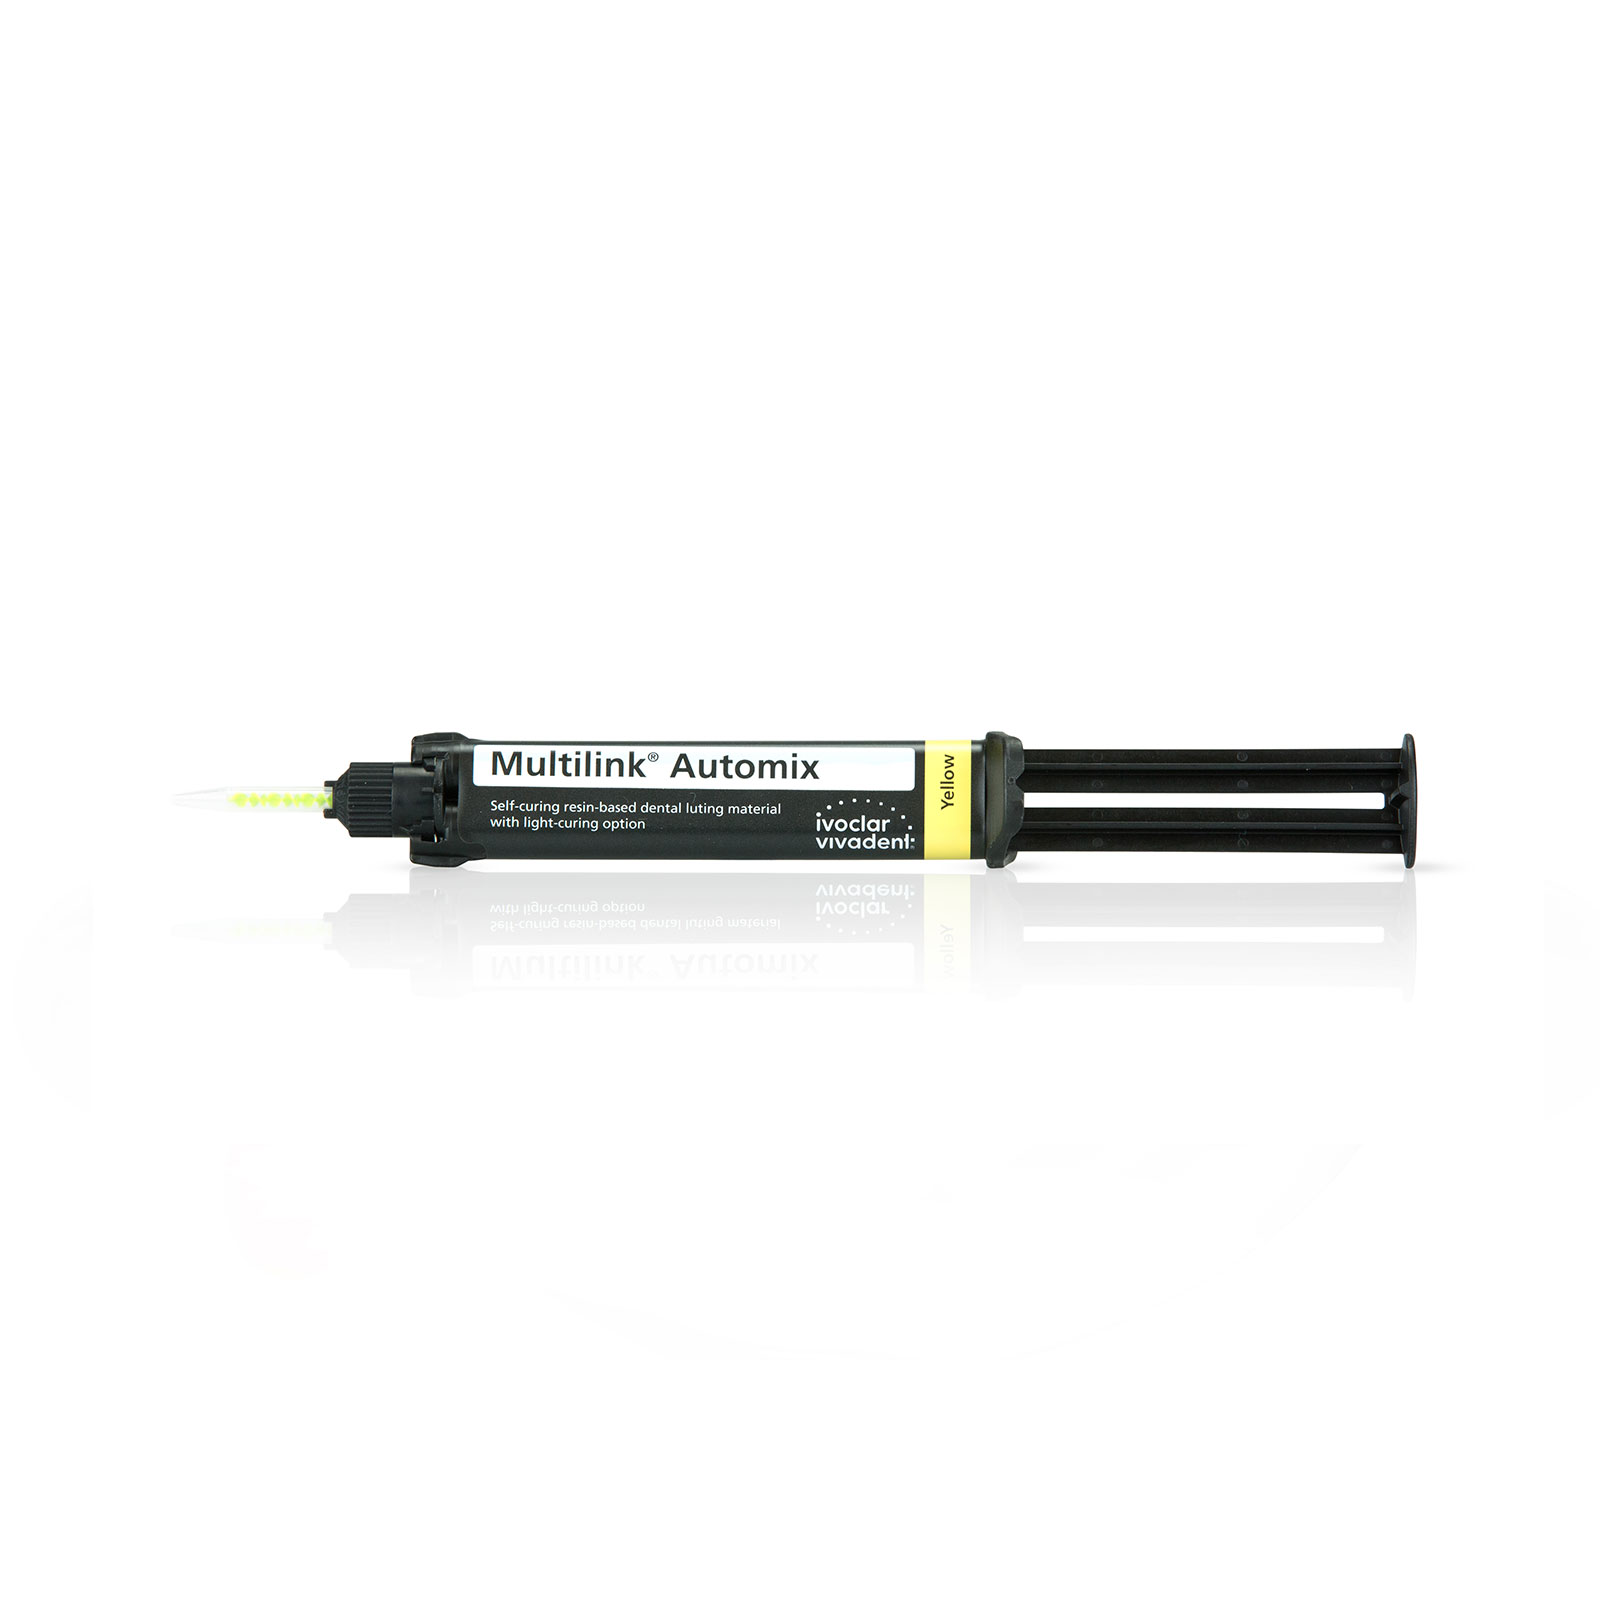 Multilink Automix Refill Yellow 9g